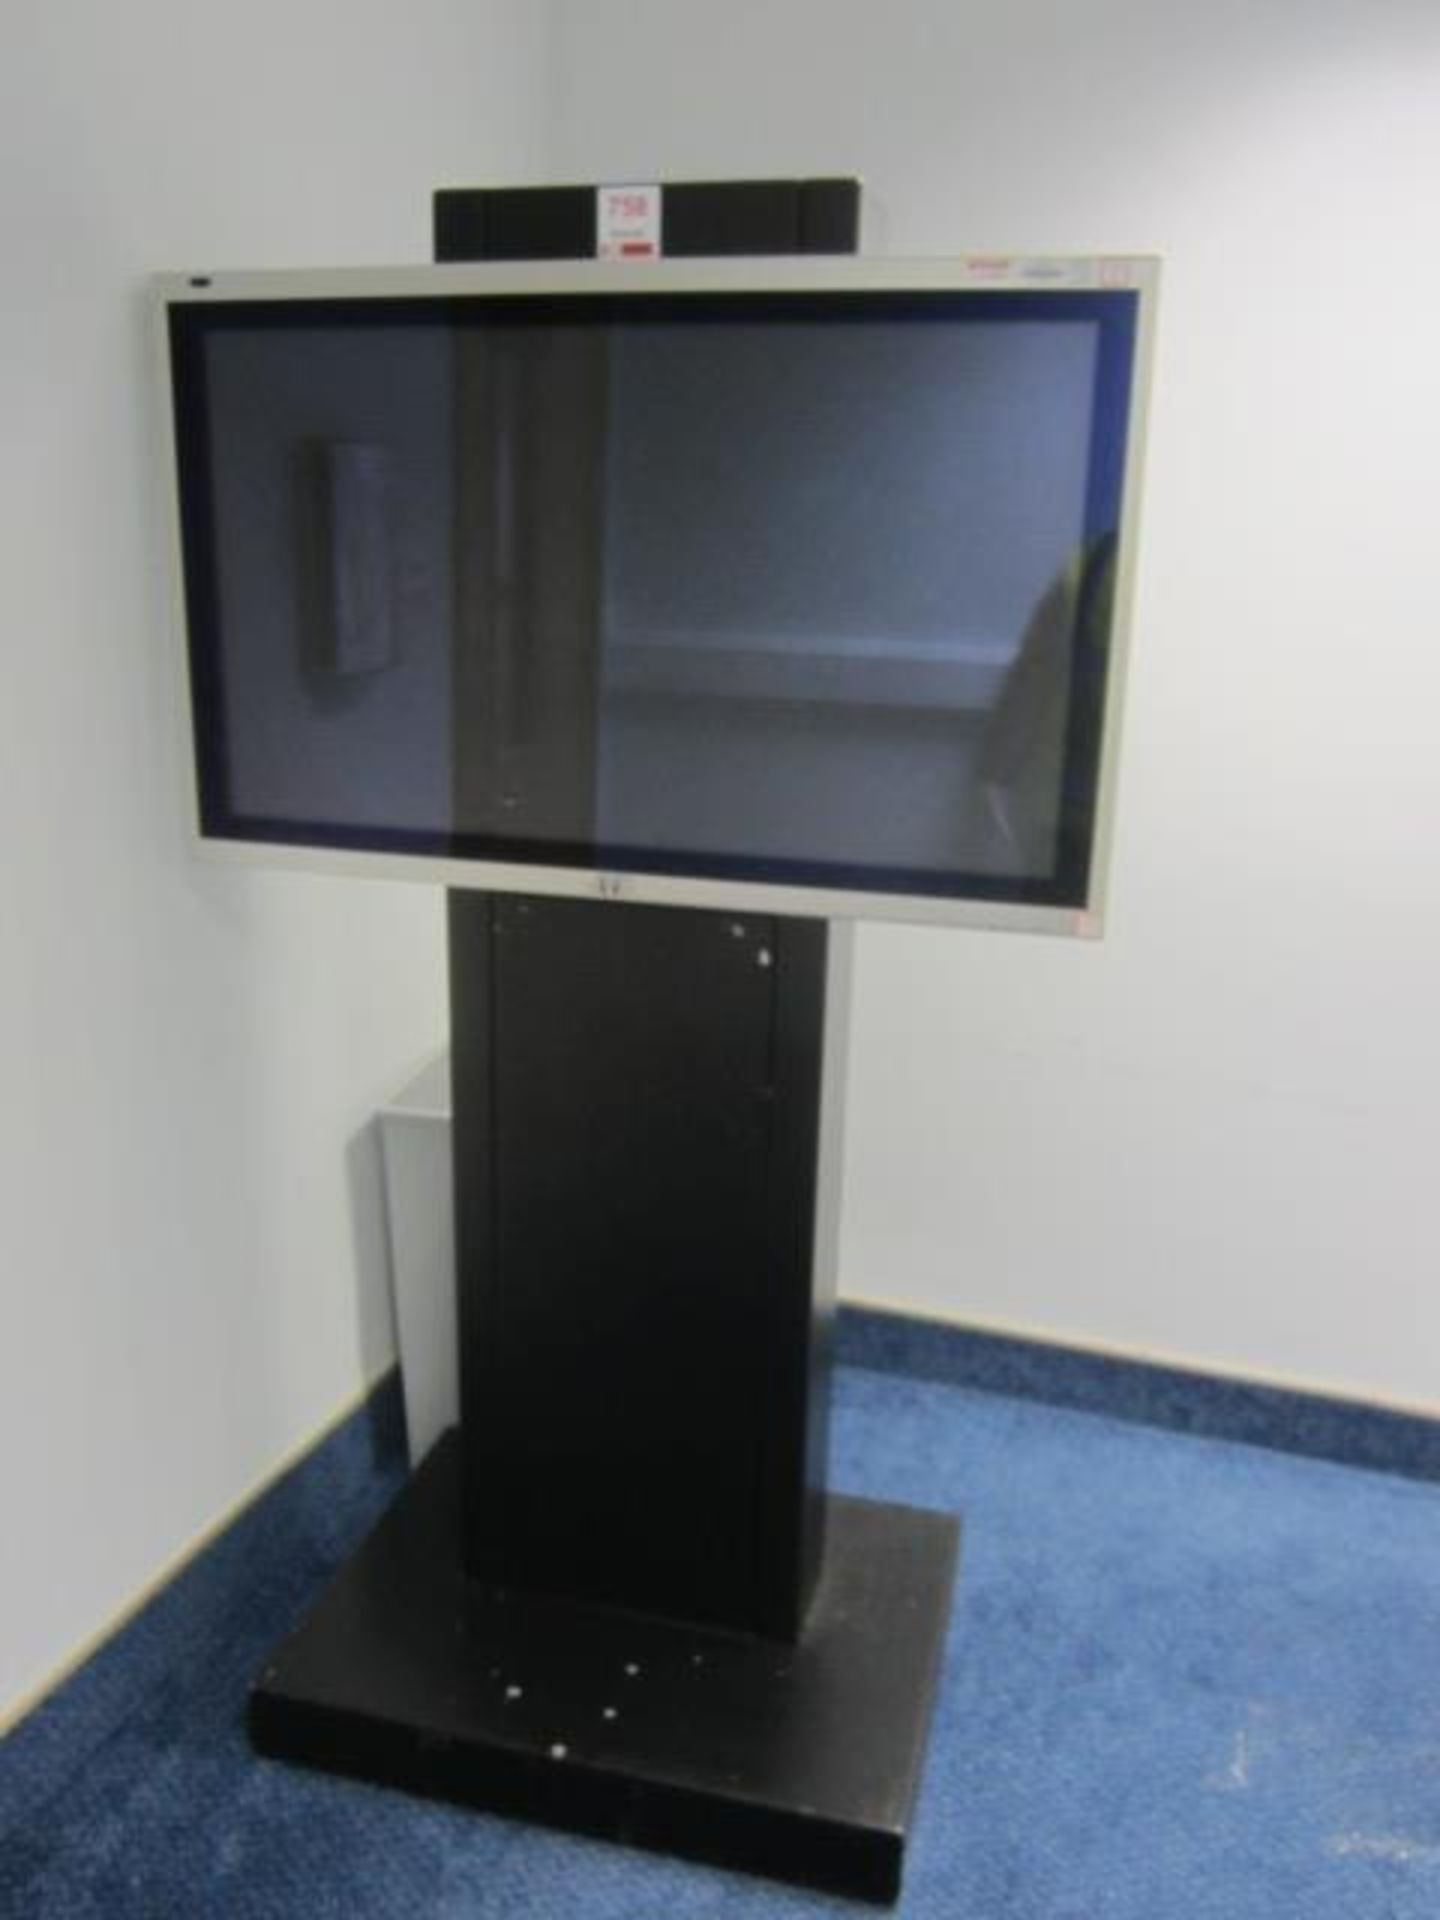 JVC 42" flat screen monitor, mounted mobile stand